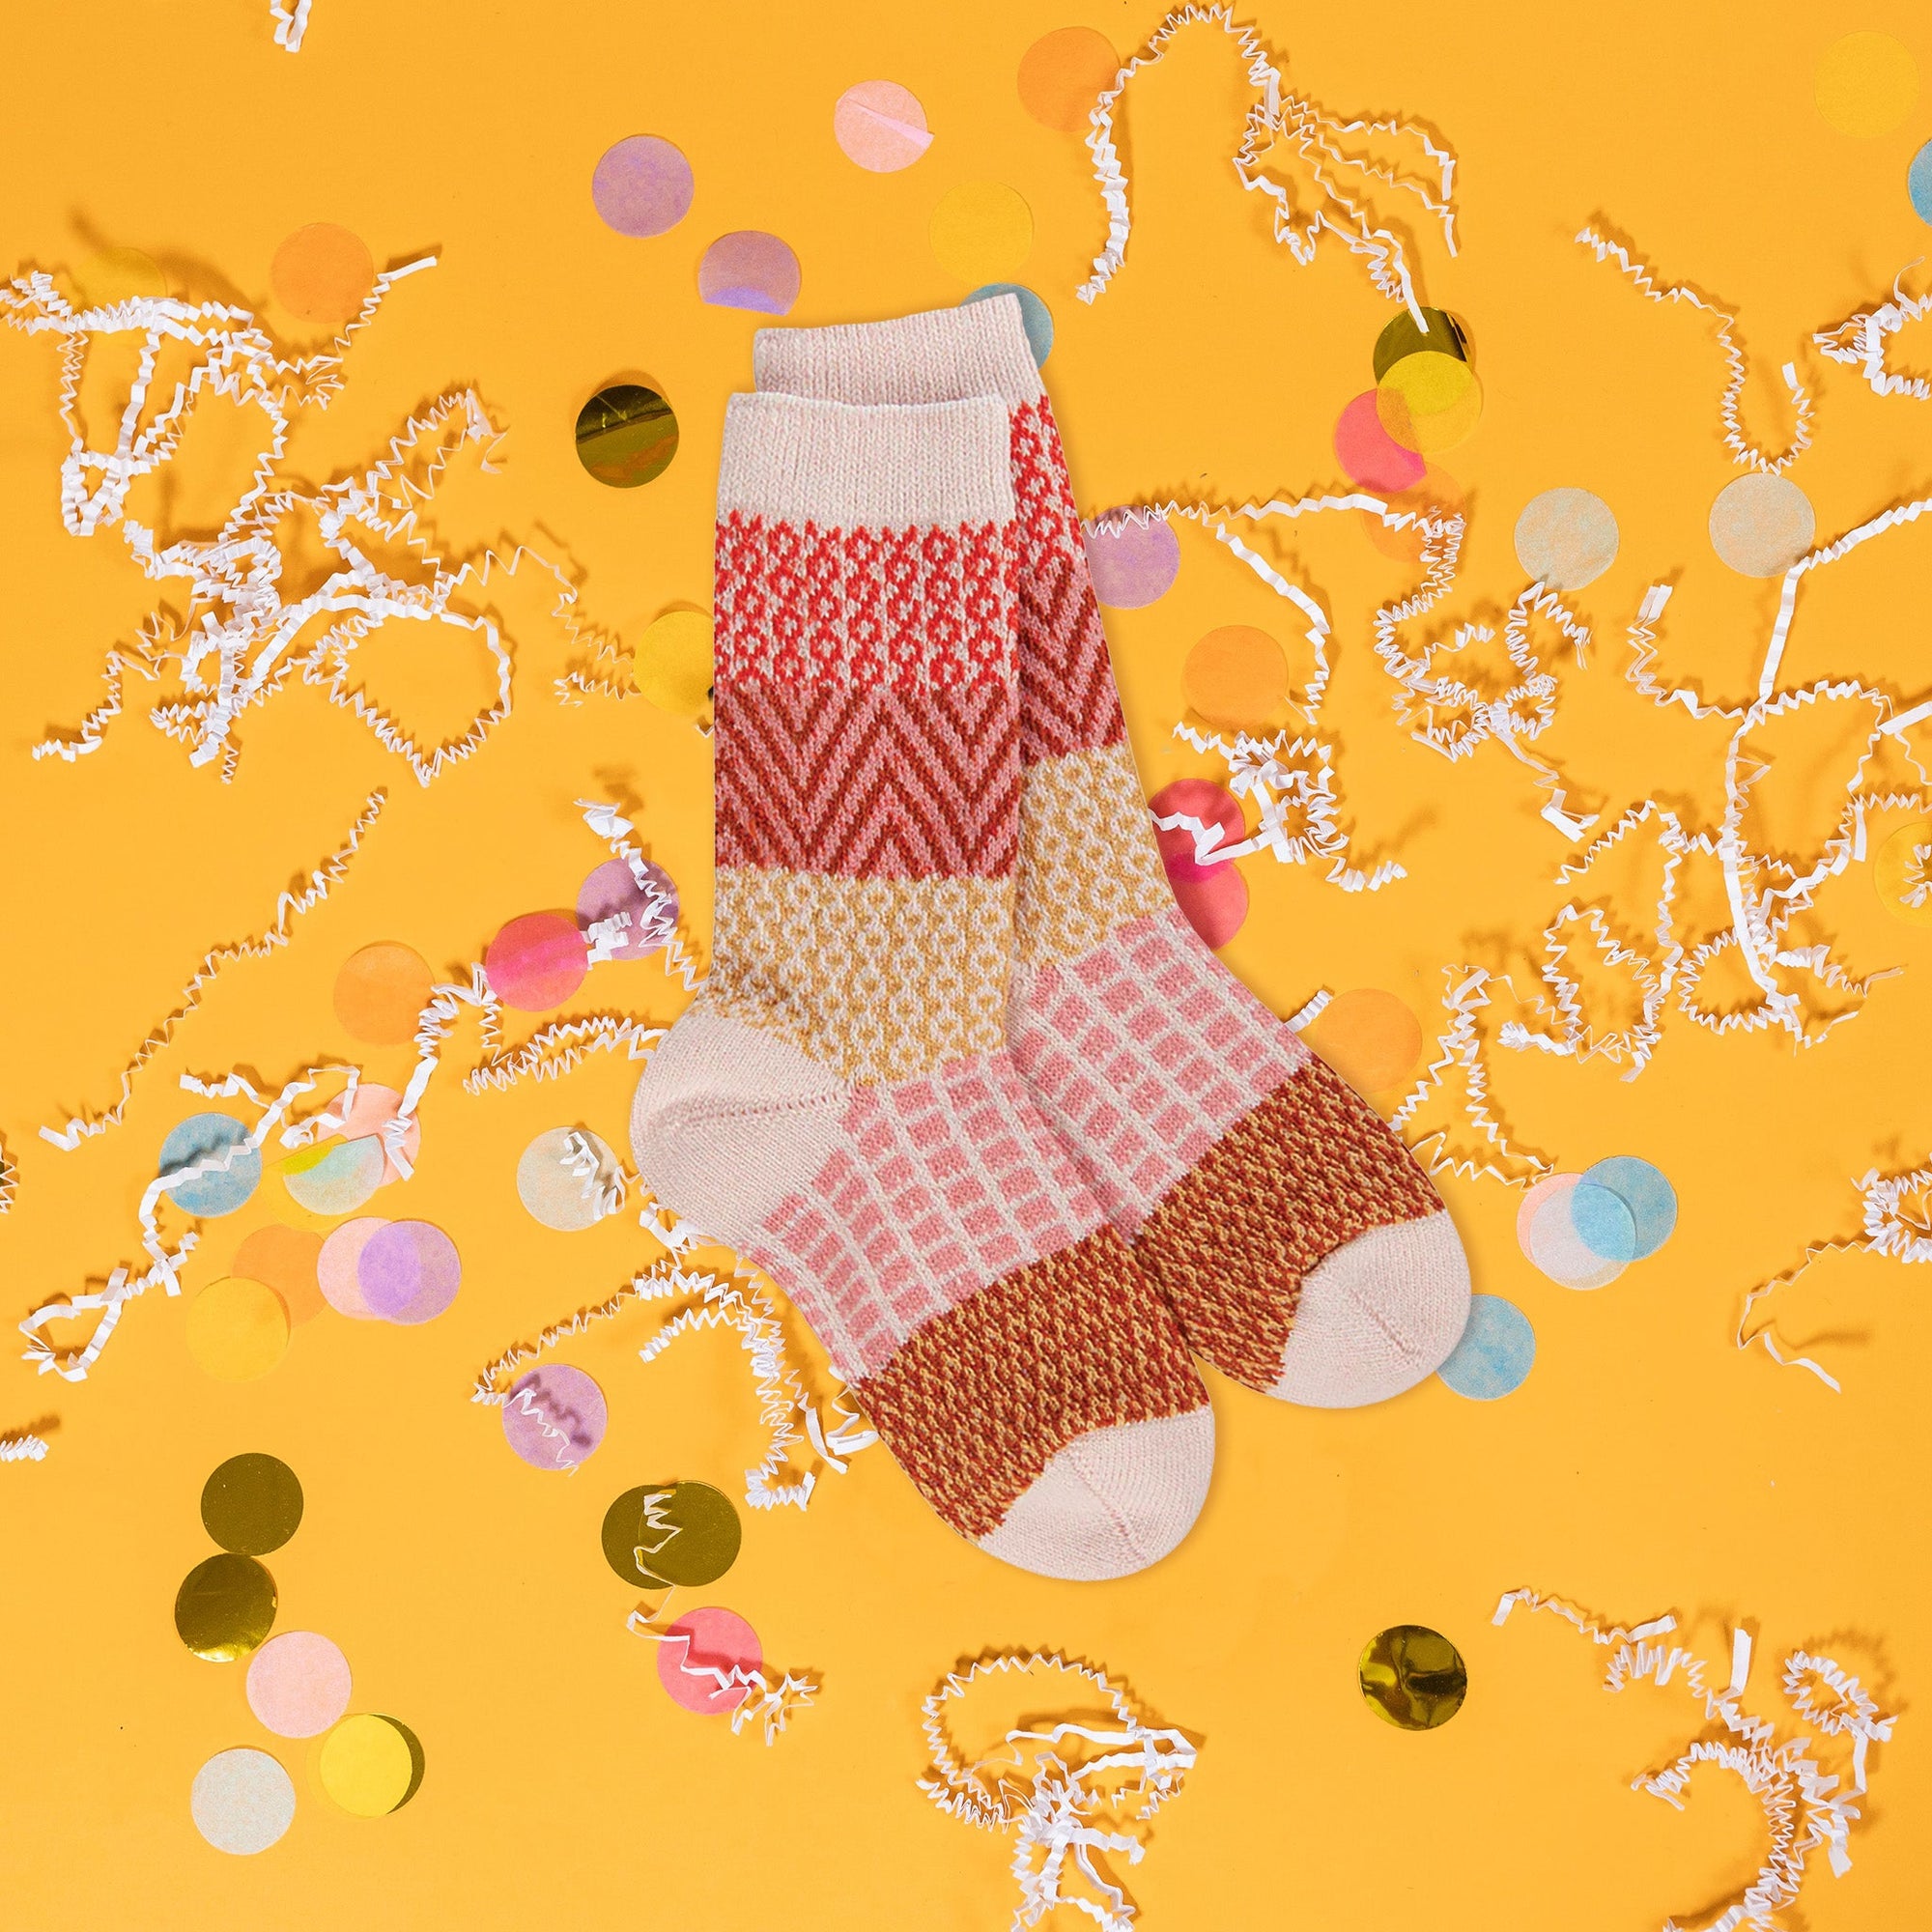 On an sunny mustard background sits the world's softest socks with different patterns in modern fall colors, including orangey-red, rust, peach, and mustard. There are white crinkle and big, colorful confetti scattered around.